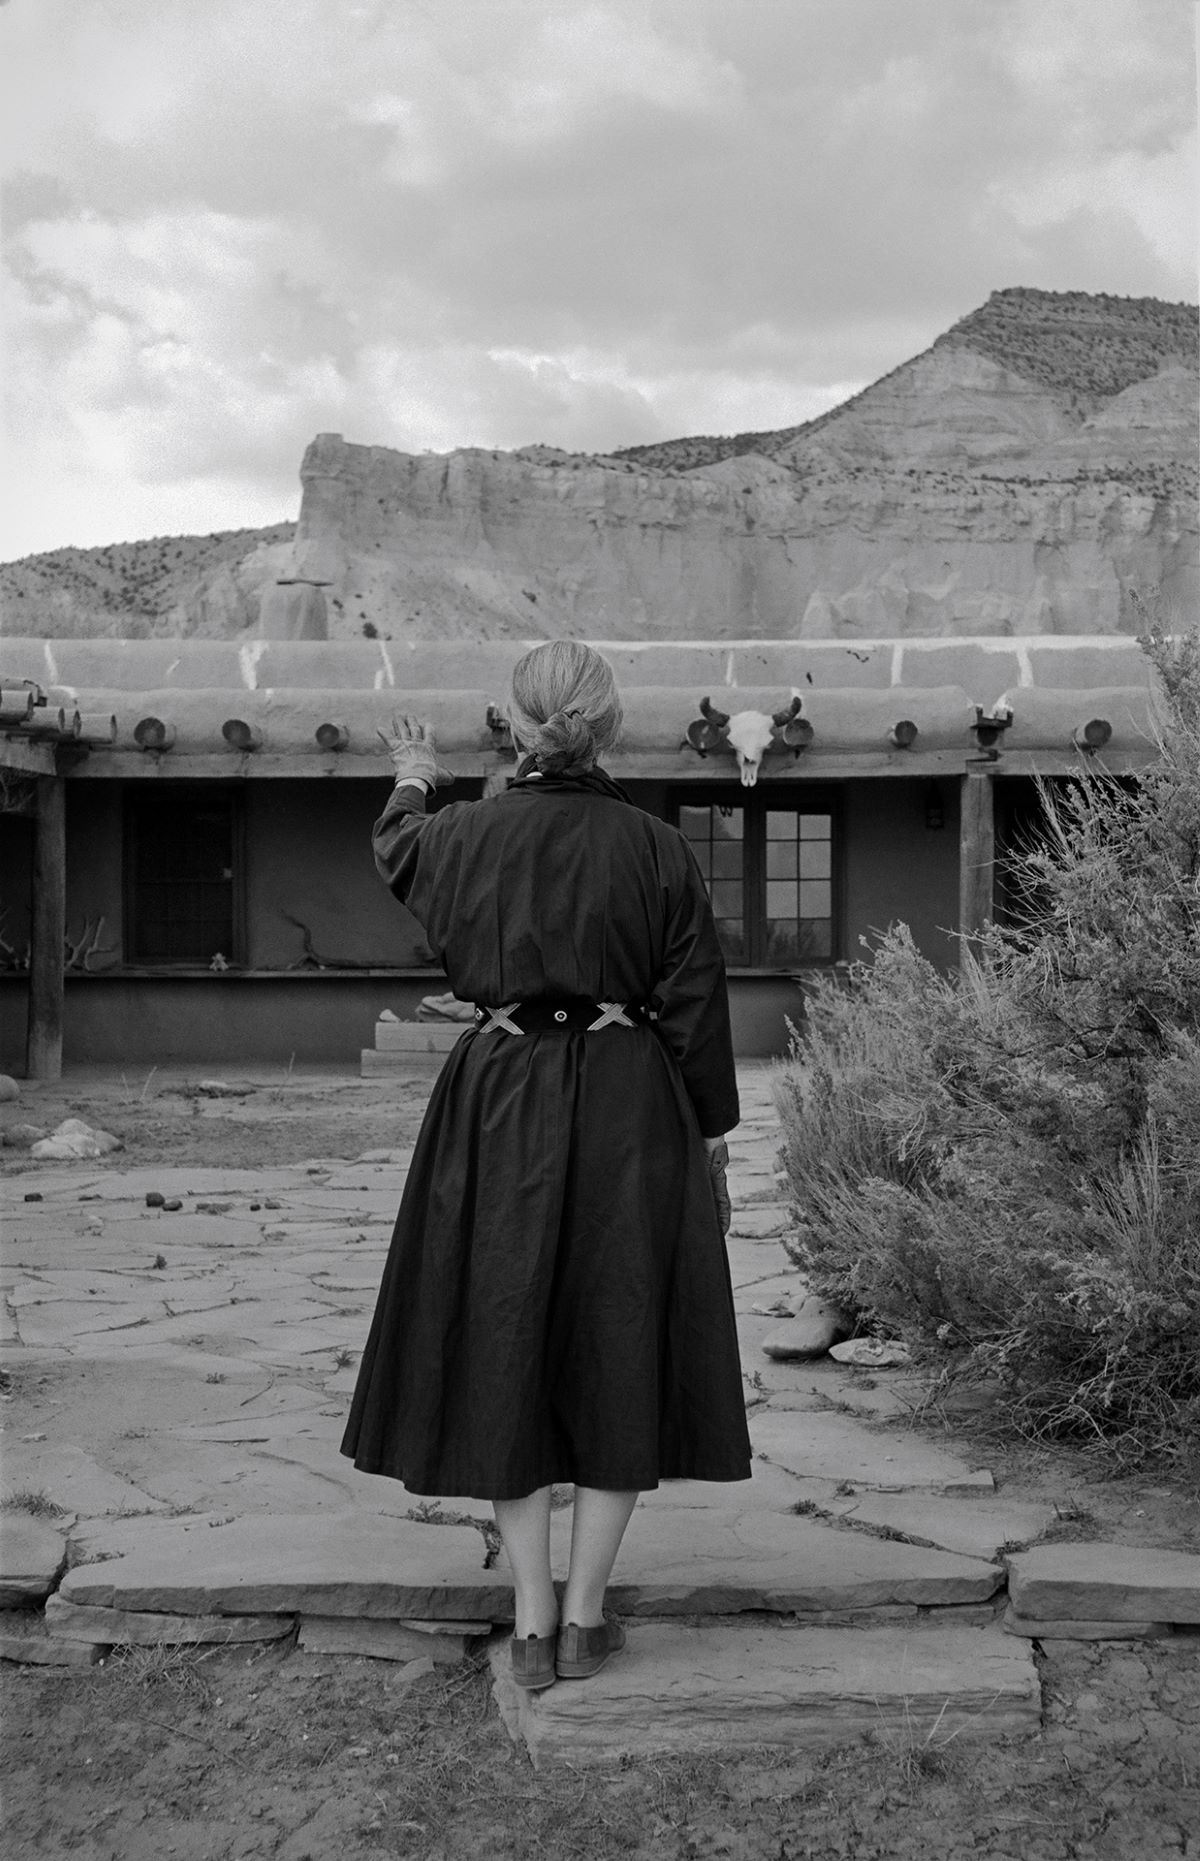 Georgia O'Keeffe at the ranch, New Mexico, 1960